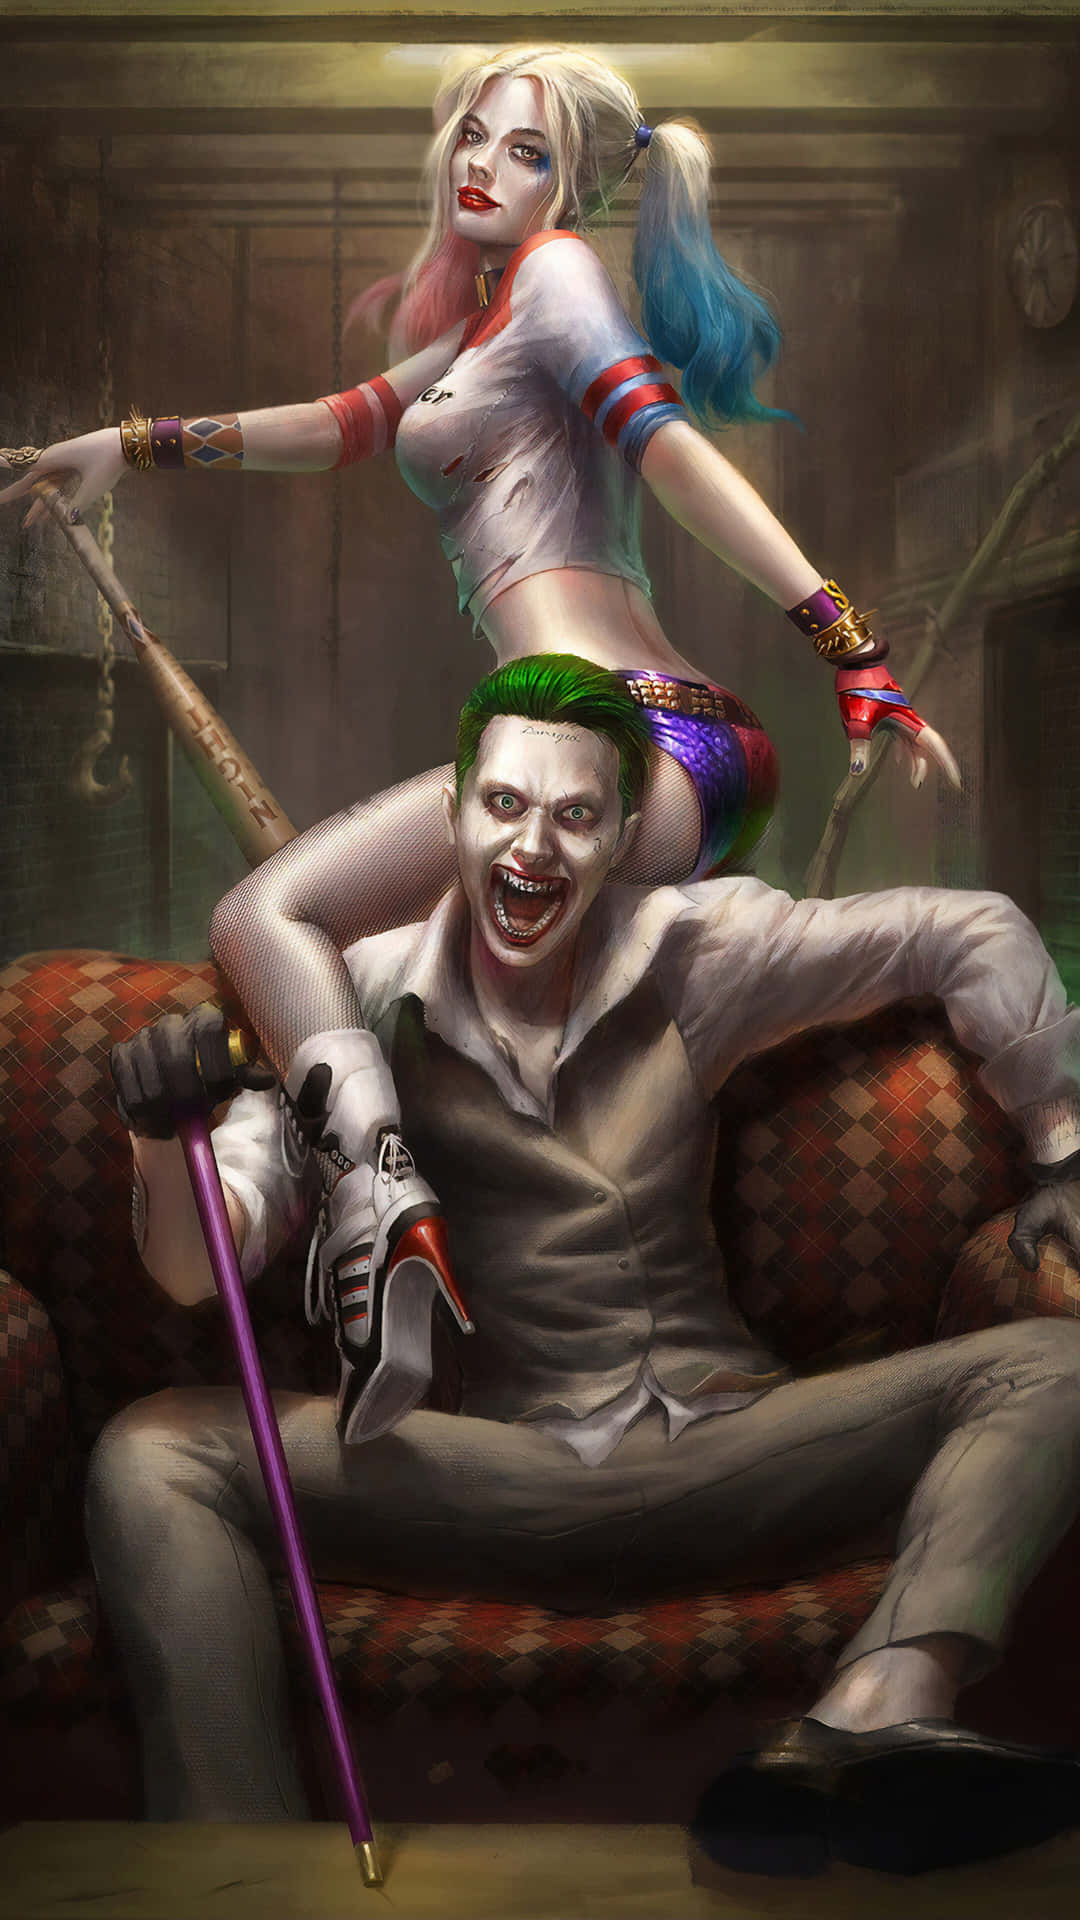 Download Love Joker And Harley Quinn Suicide Squad Wallpaper | Wallpapers .com